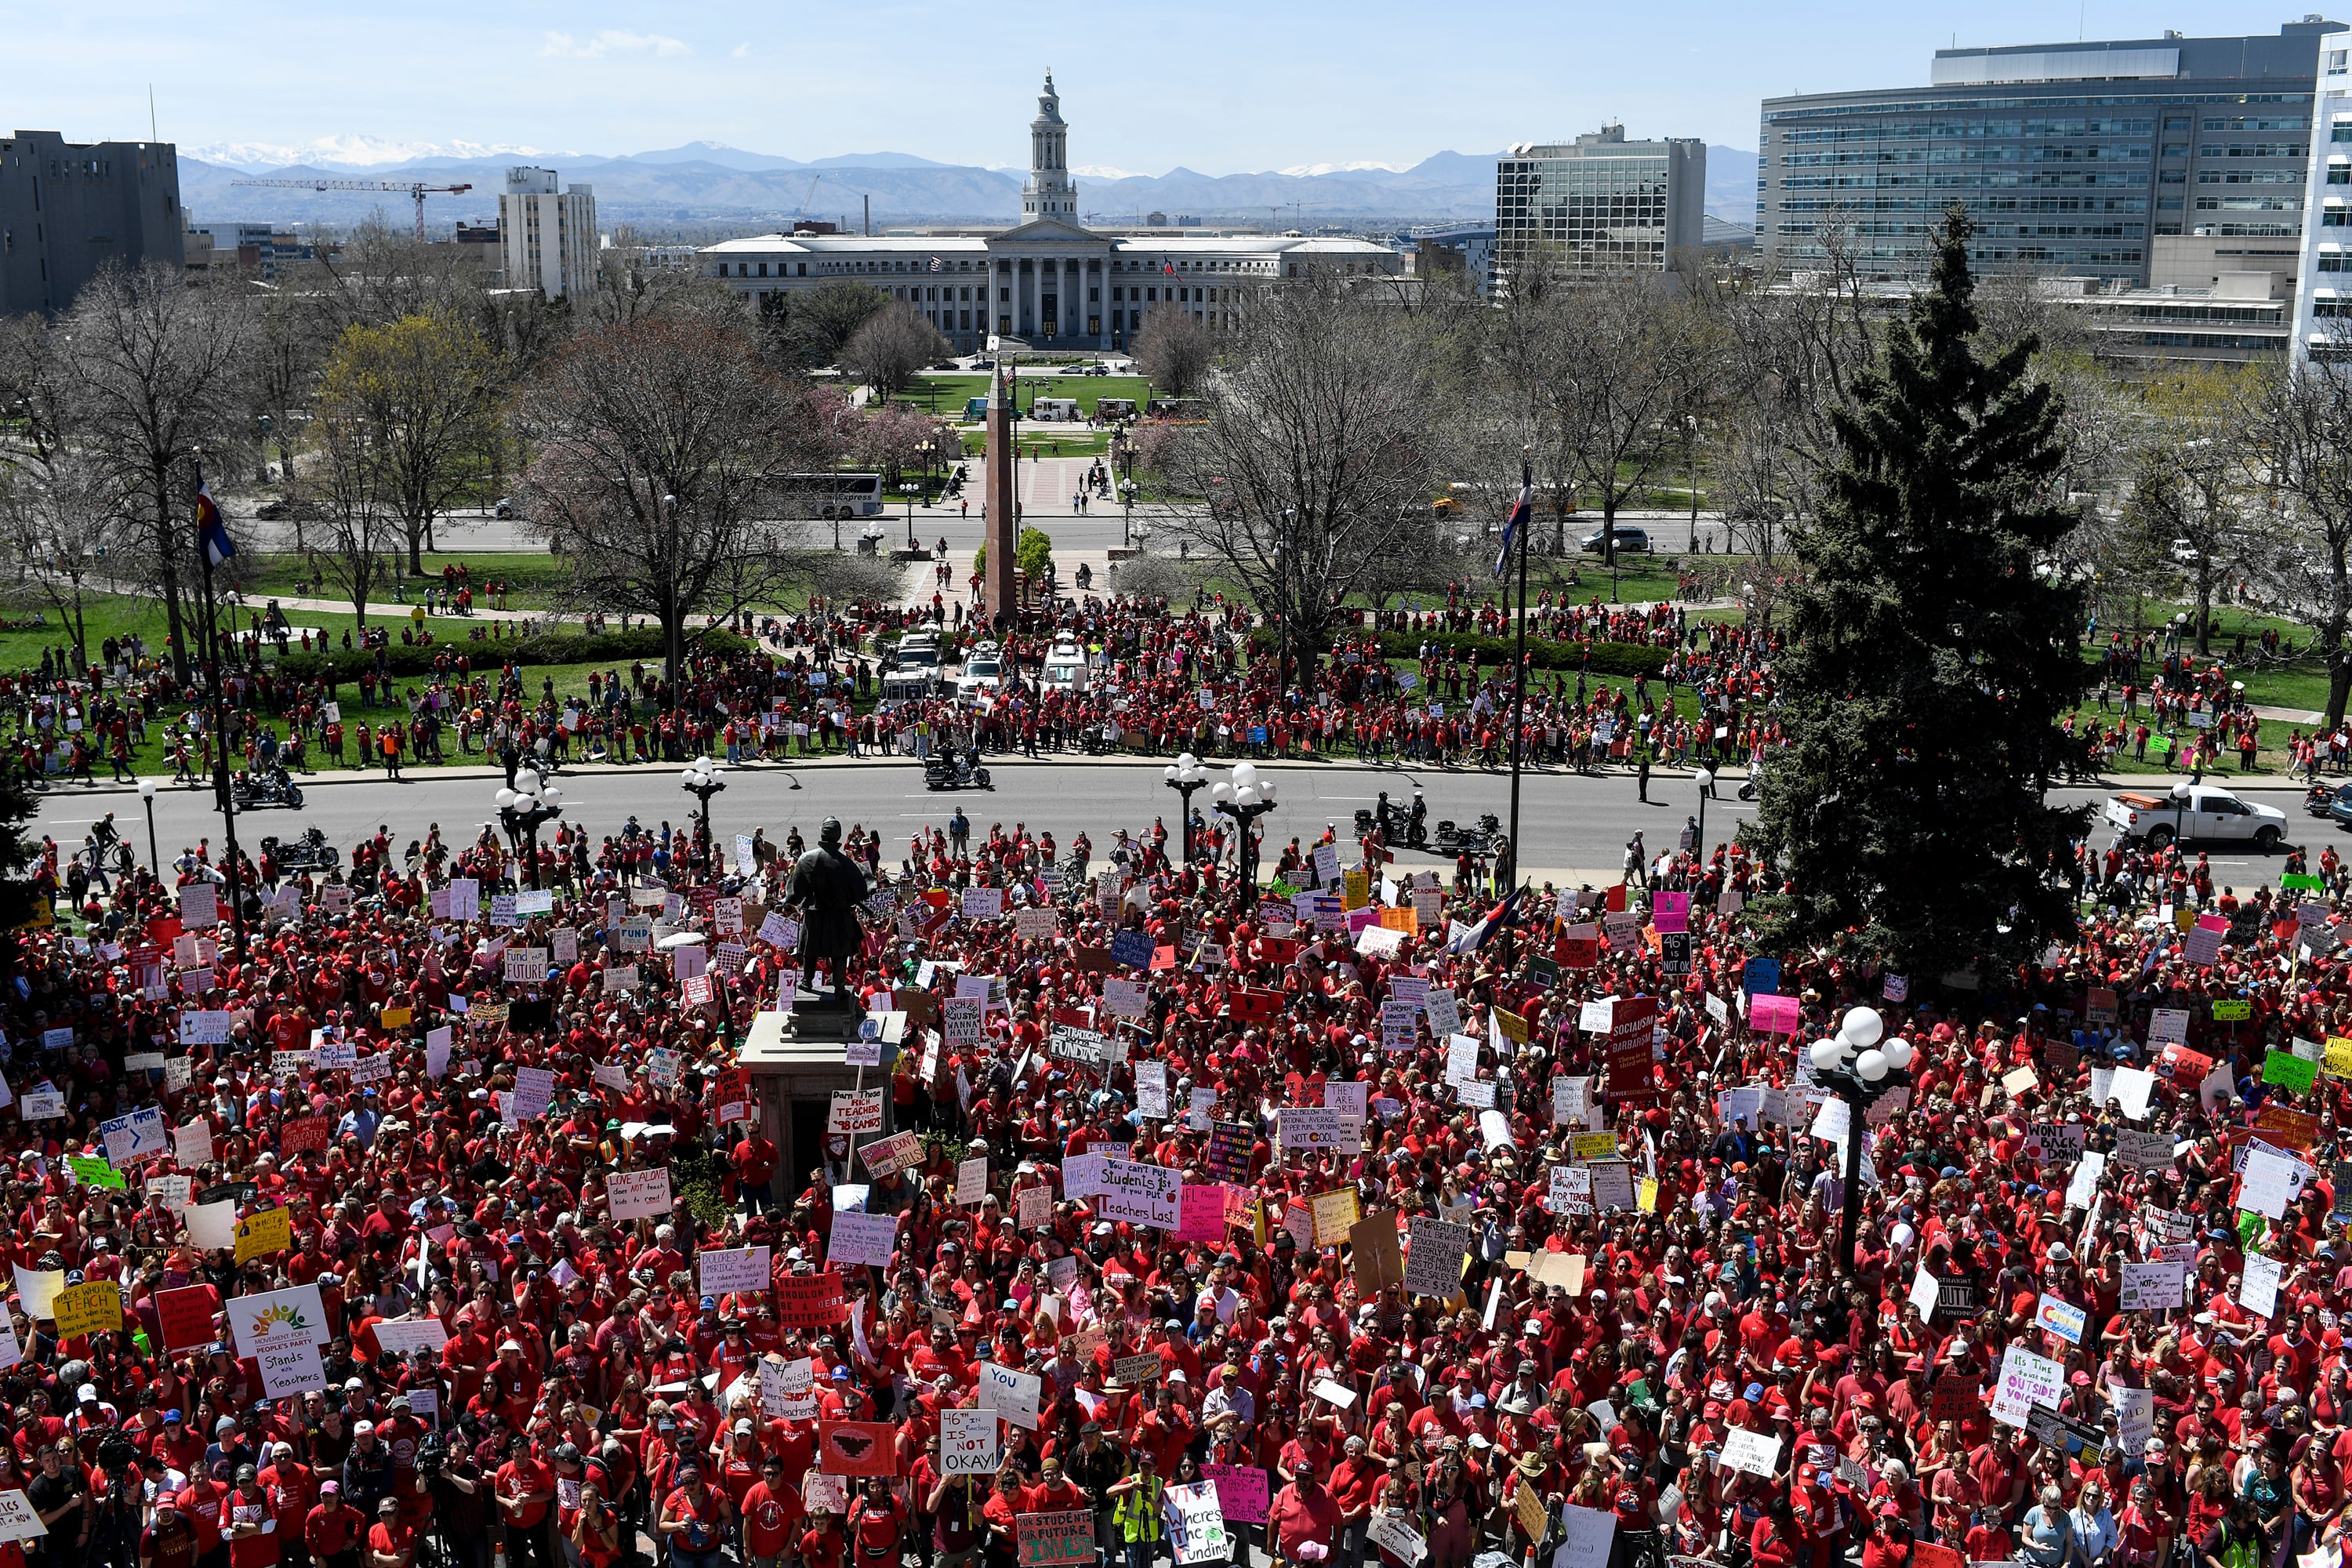 A view of the Colorado State Capitol building in the background with a sea of people protesting and majority wearing red shirts.